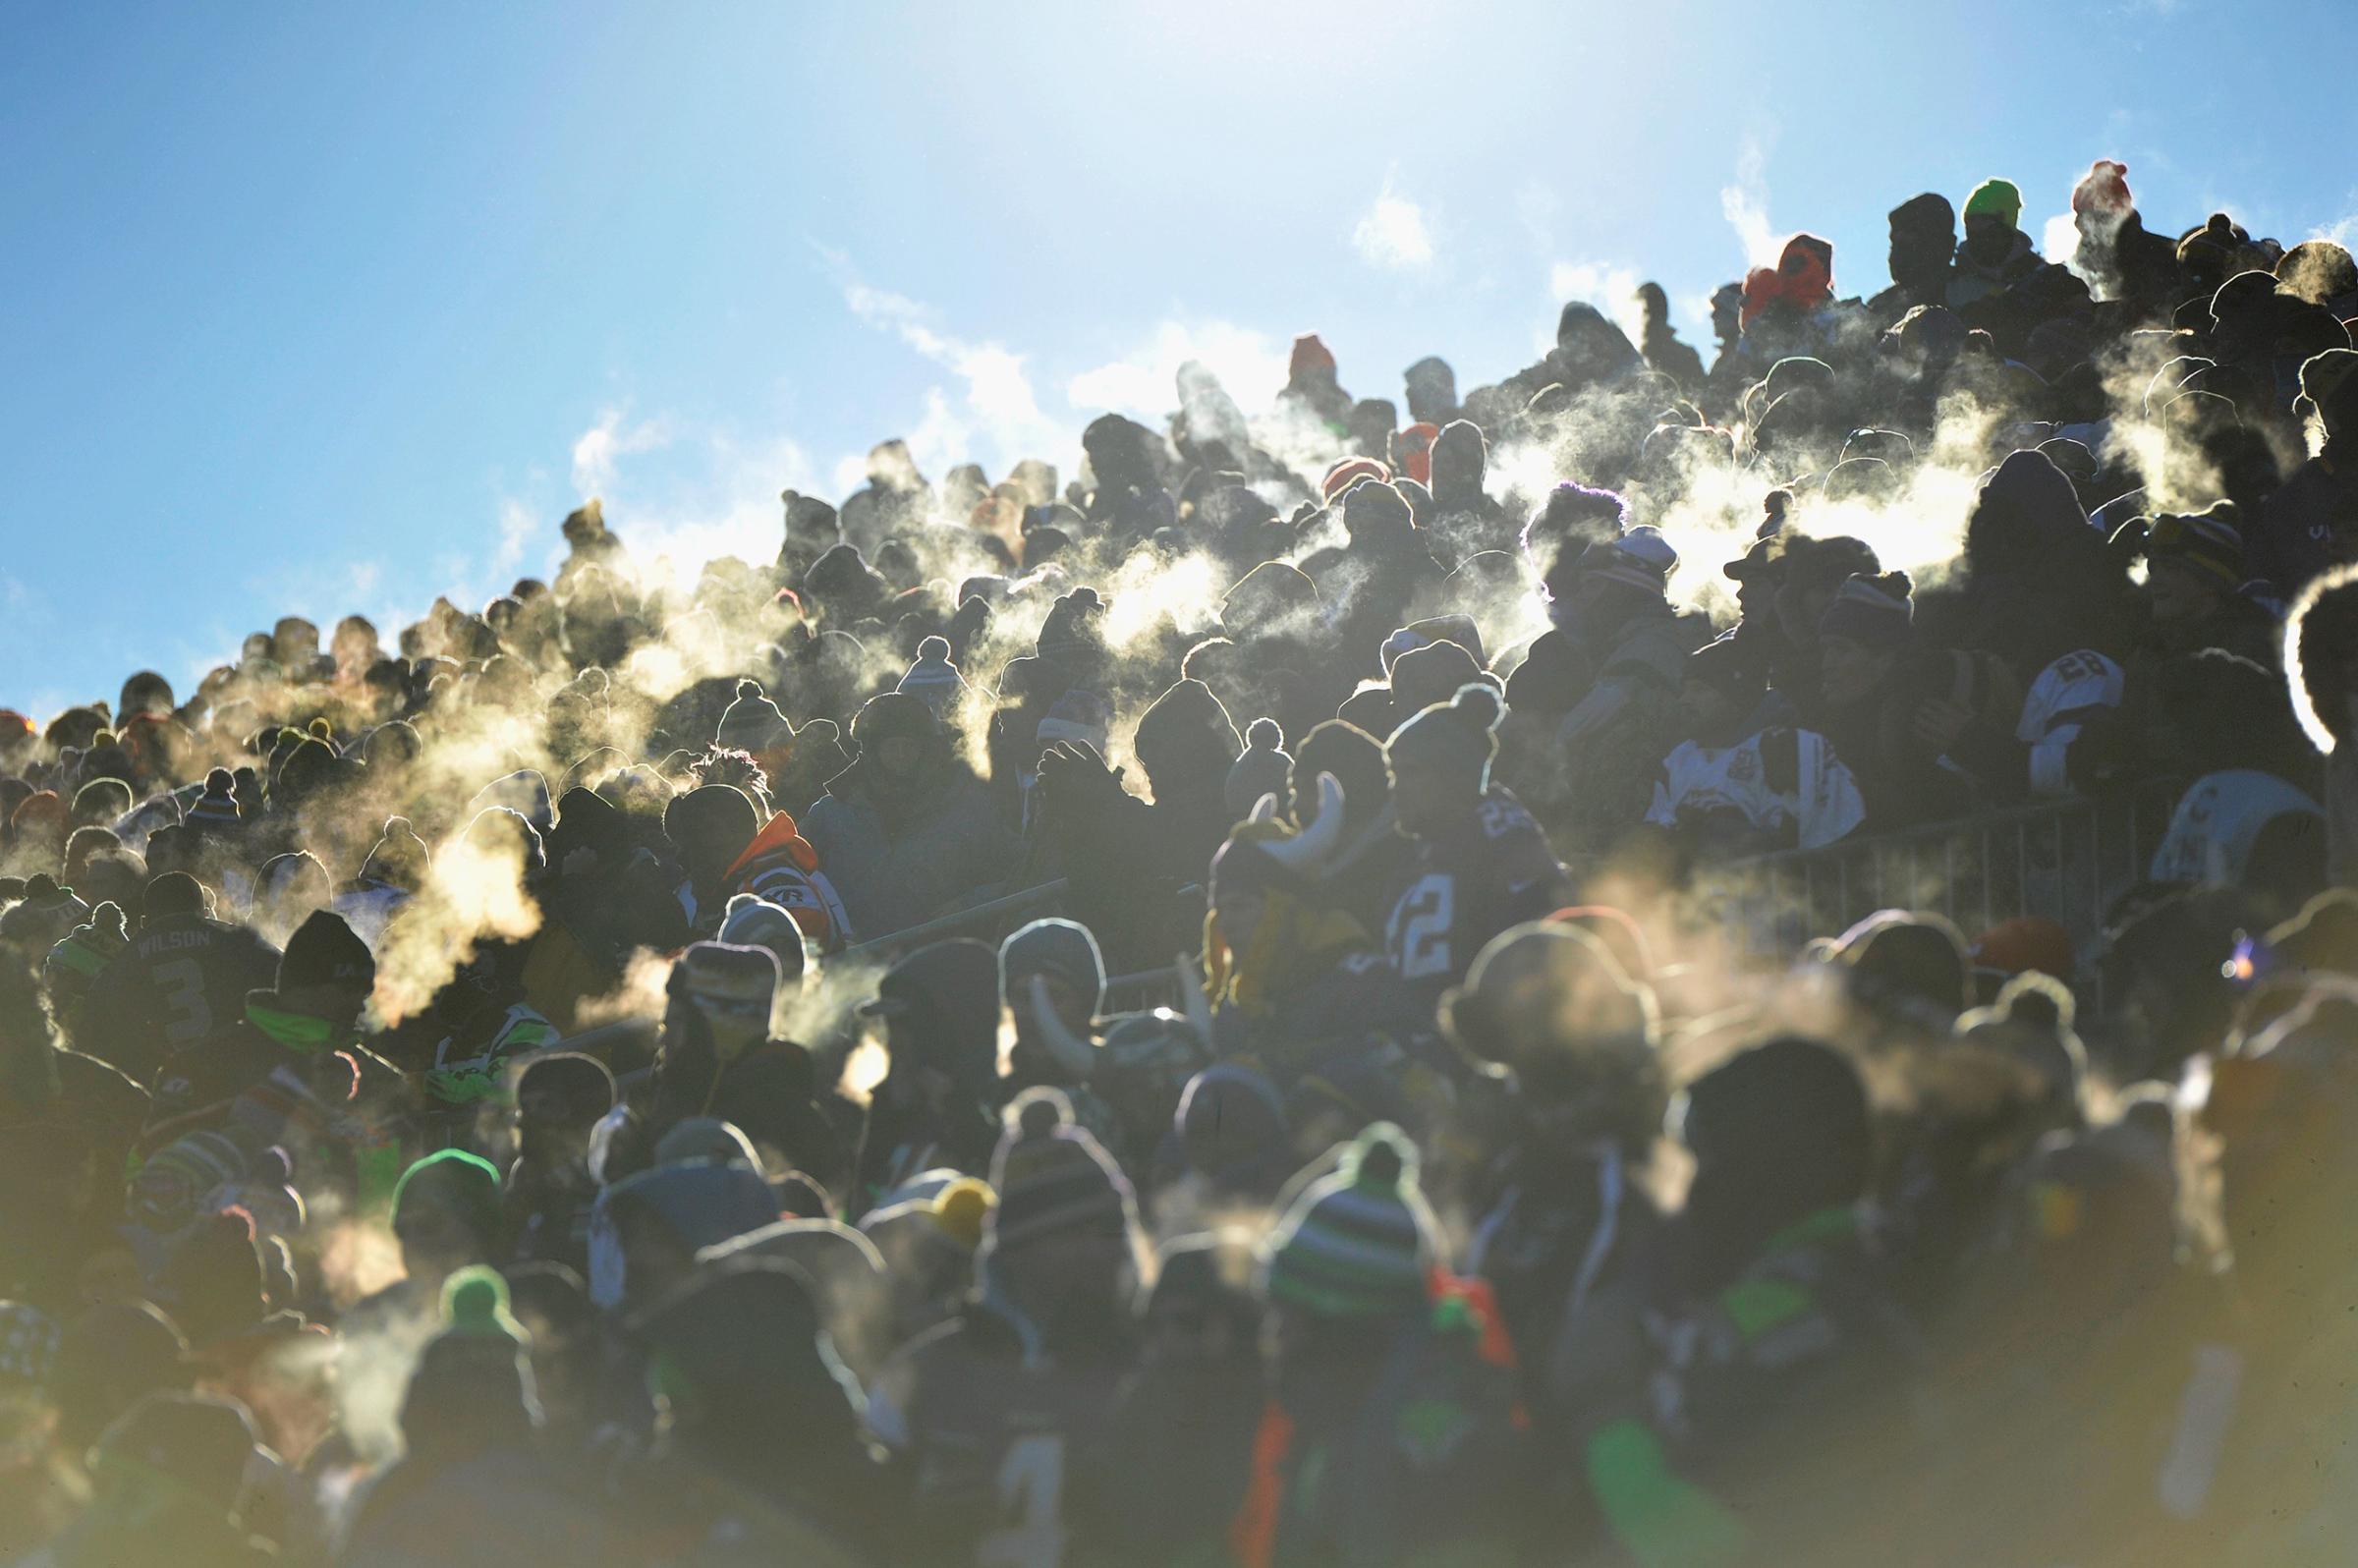 Fans during the NFC Wild Card Playoff game between the Minnesota Vikings and the Seattle Seahawks at TCFBank Stadium in Minneapolis, Minnesota, on Jan. 10, 2016.